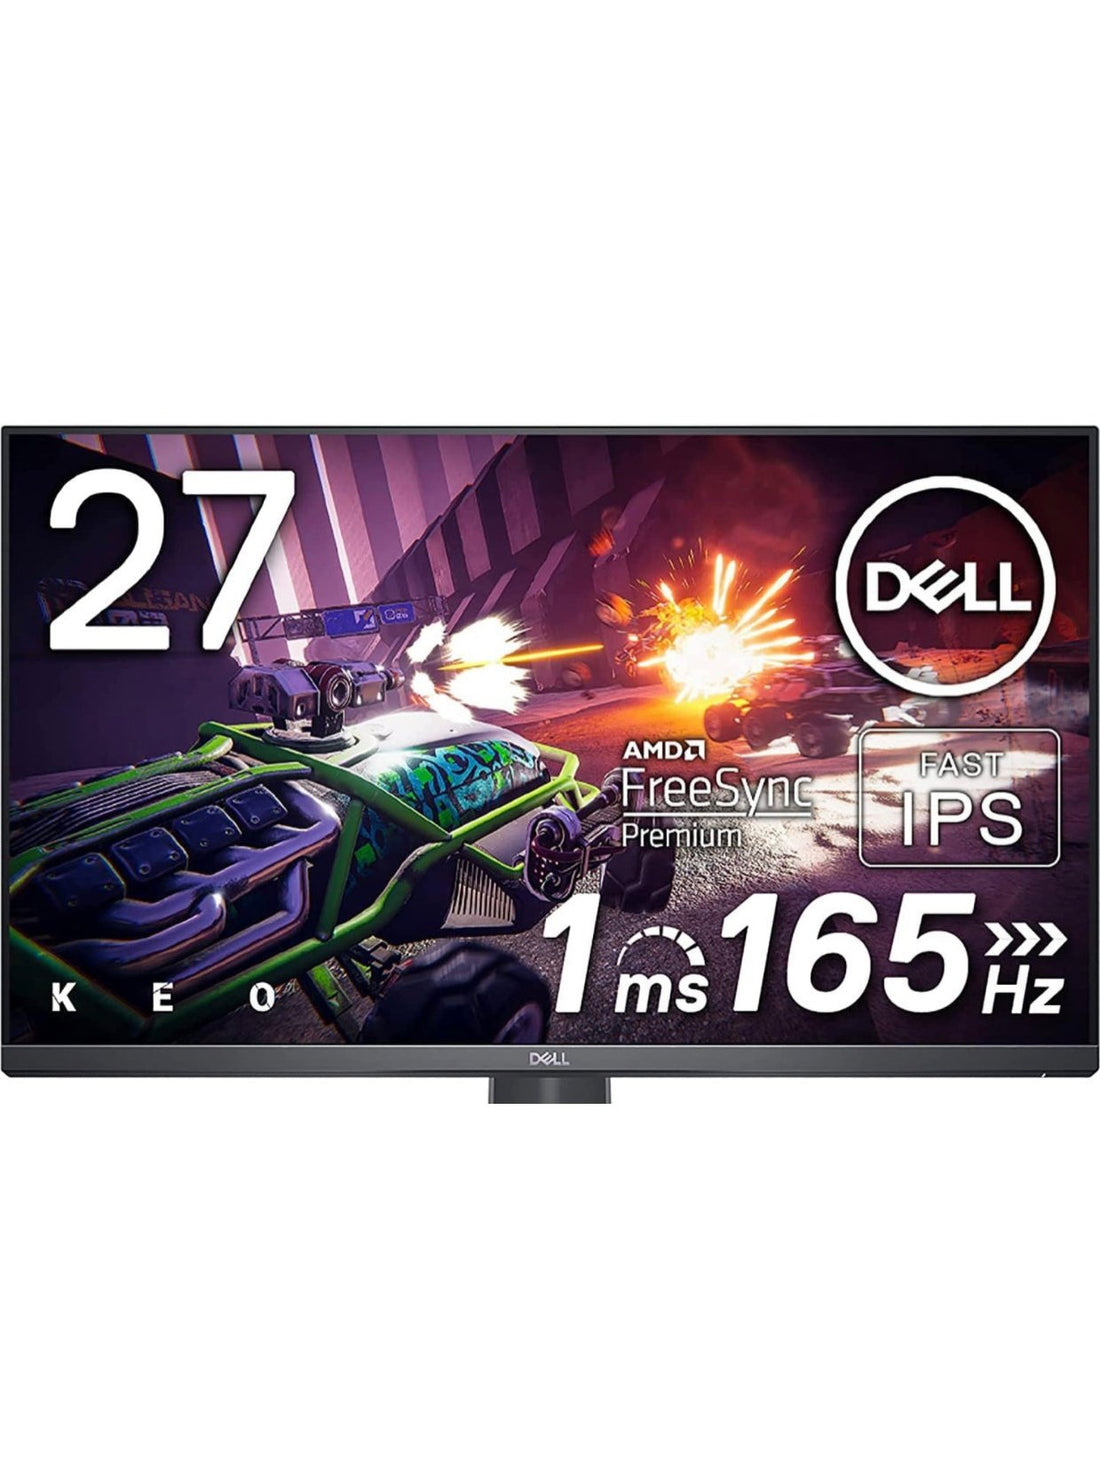 Dell G2722HS IPS 27 Inch 165Hz Gaming Monitor - FHD Full HD 1920 x 1080p, LED LCD Display, AMD FreeSync Premium and NVIDIA G-Sync Compatible, HDMI, DisplayPort, Thin Bezel - Black